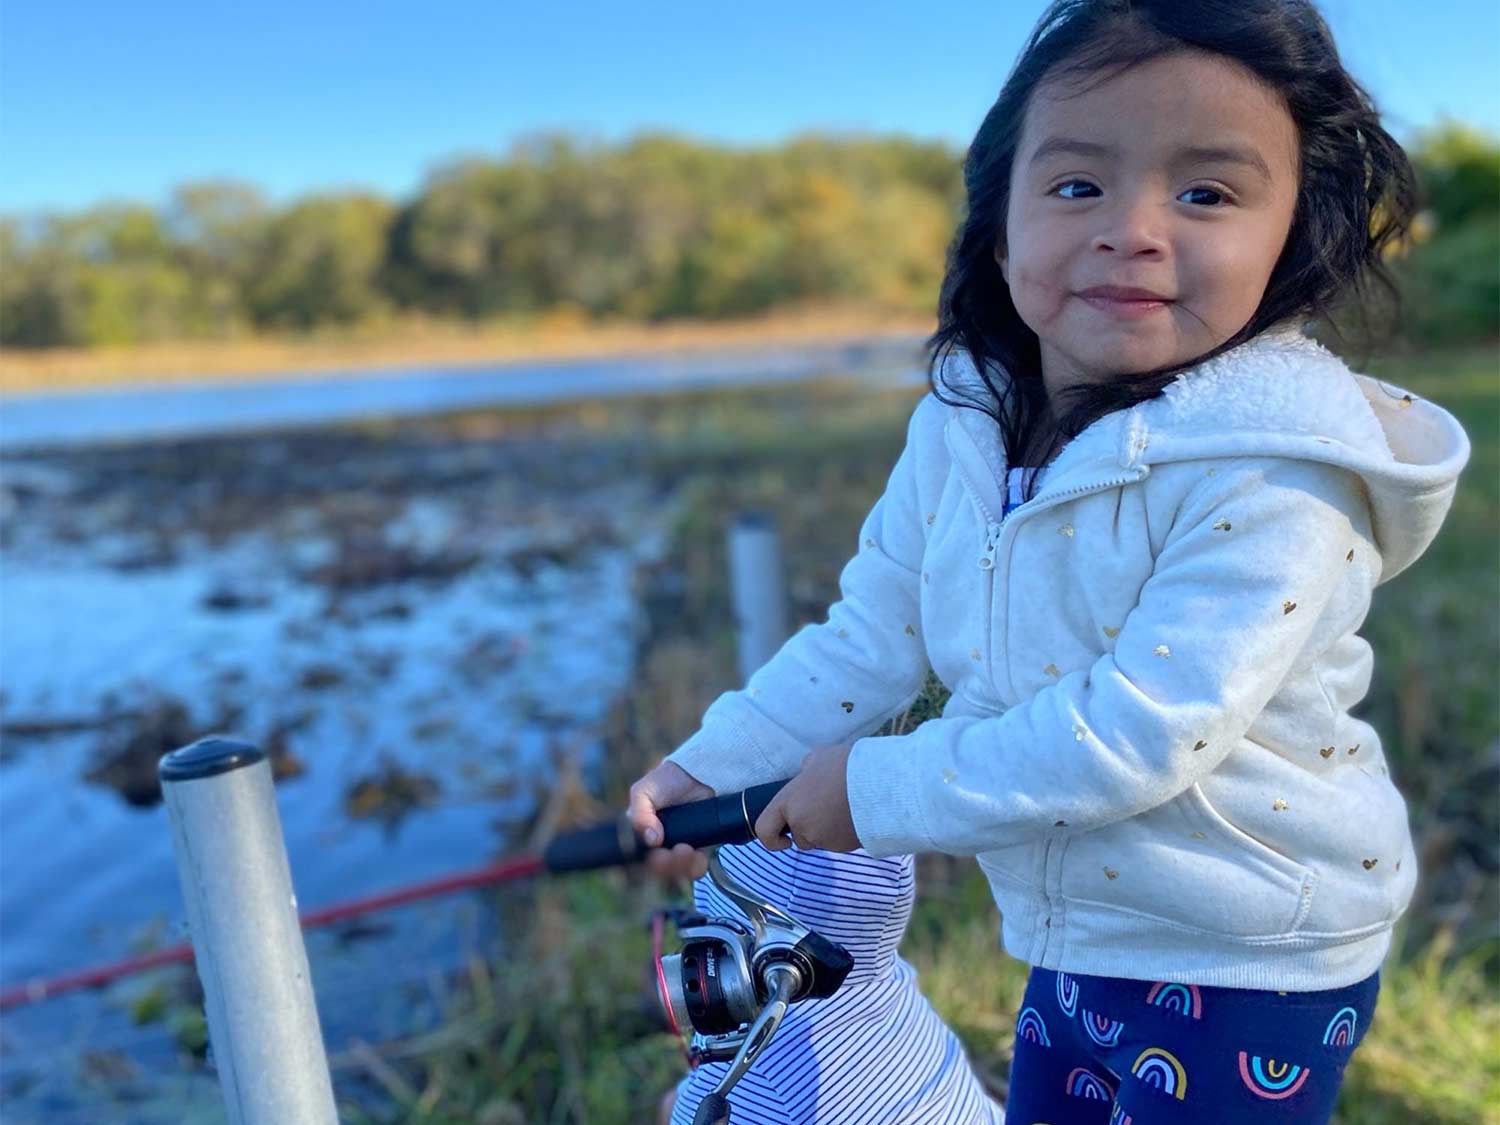 The happiness and heartbreak of a daughter's first fishing trip